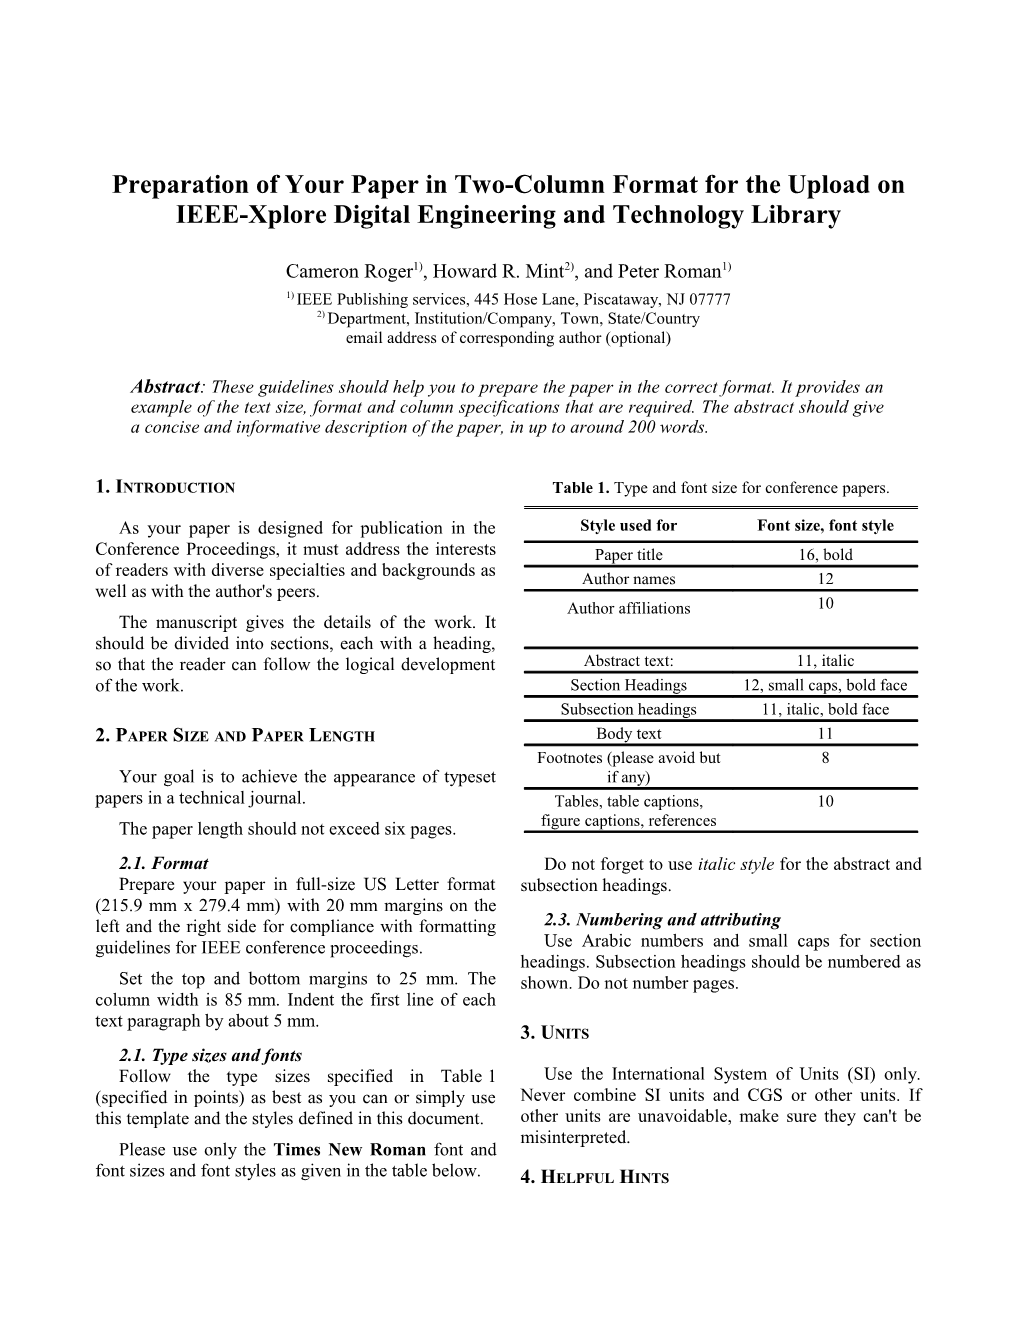 ISSE 2009 Paper Template